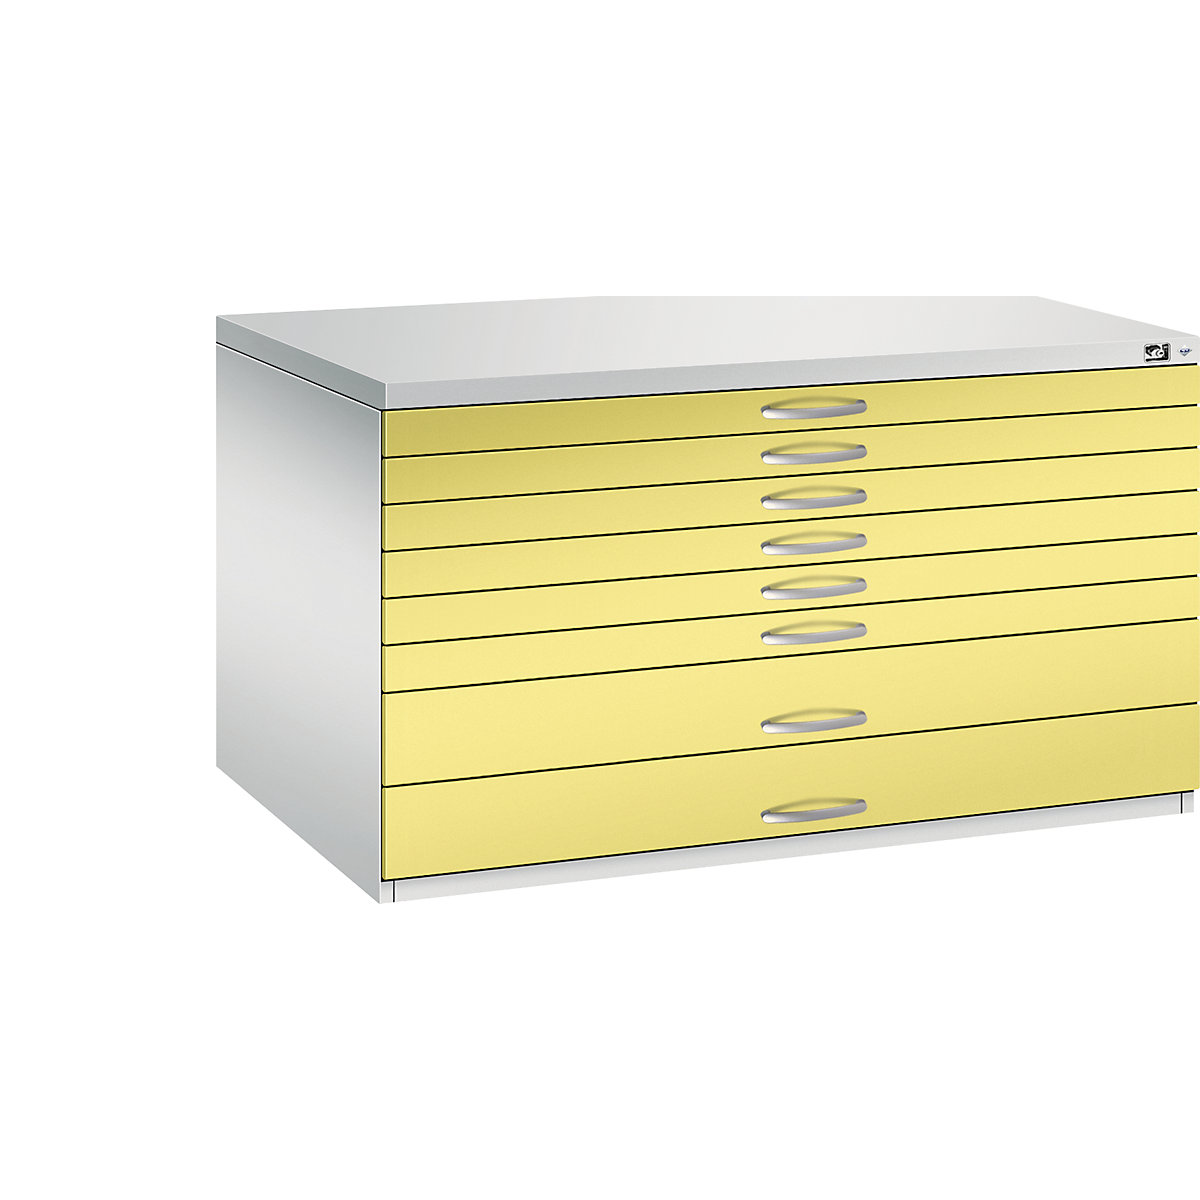 Drawing cabinet – C+P, A0, 8 drawers, height 760 mm, light grey / sulphur yellow-20